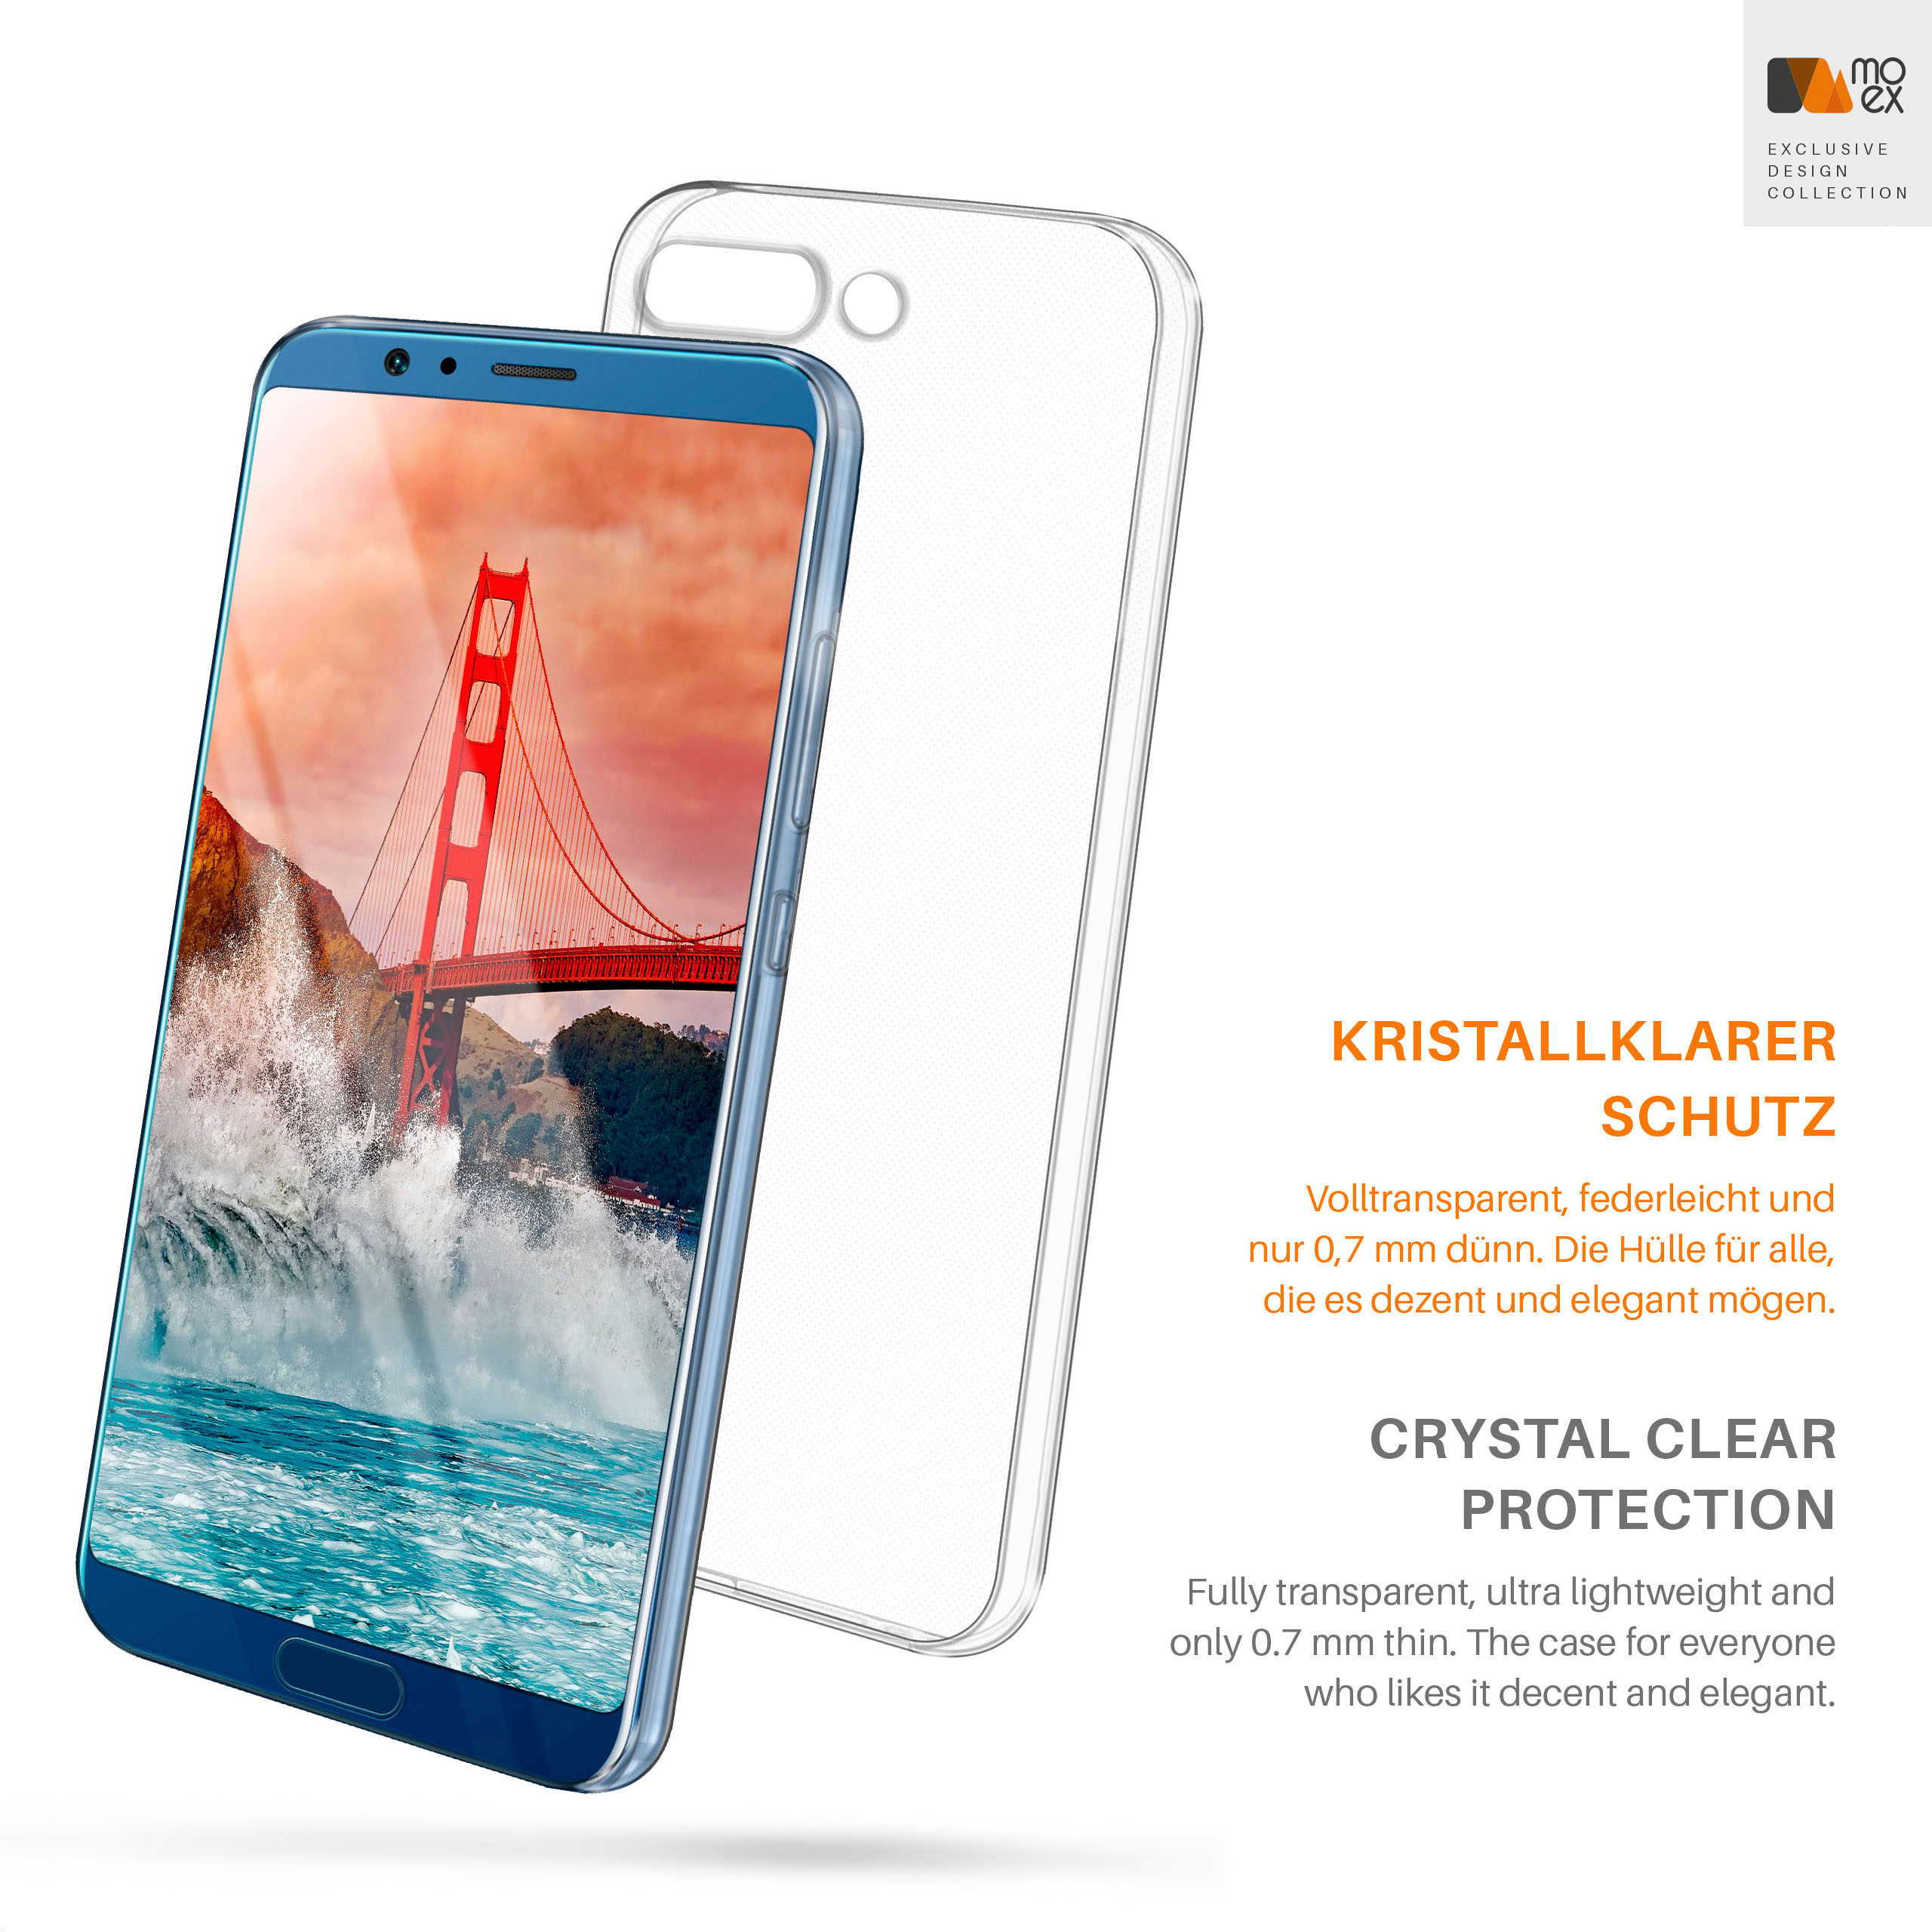 MOEX Aero Case, Backcover, Huawei, View 10, Crystal-Clear Honor